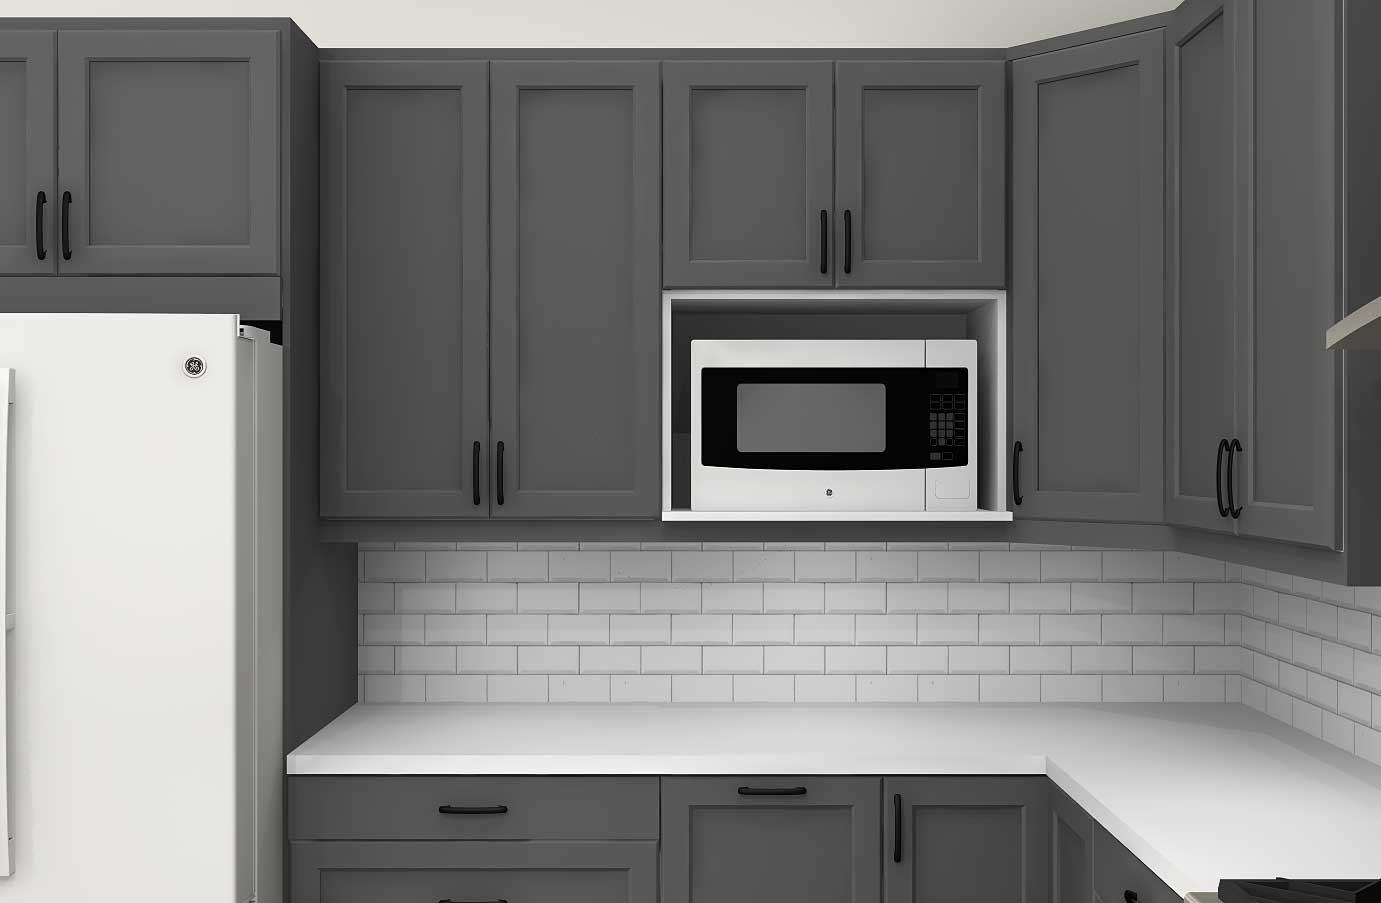 upper kitchen wall cabinet with microwave shelf